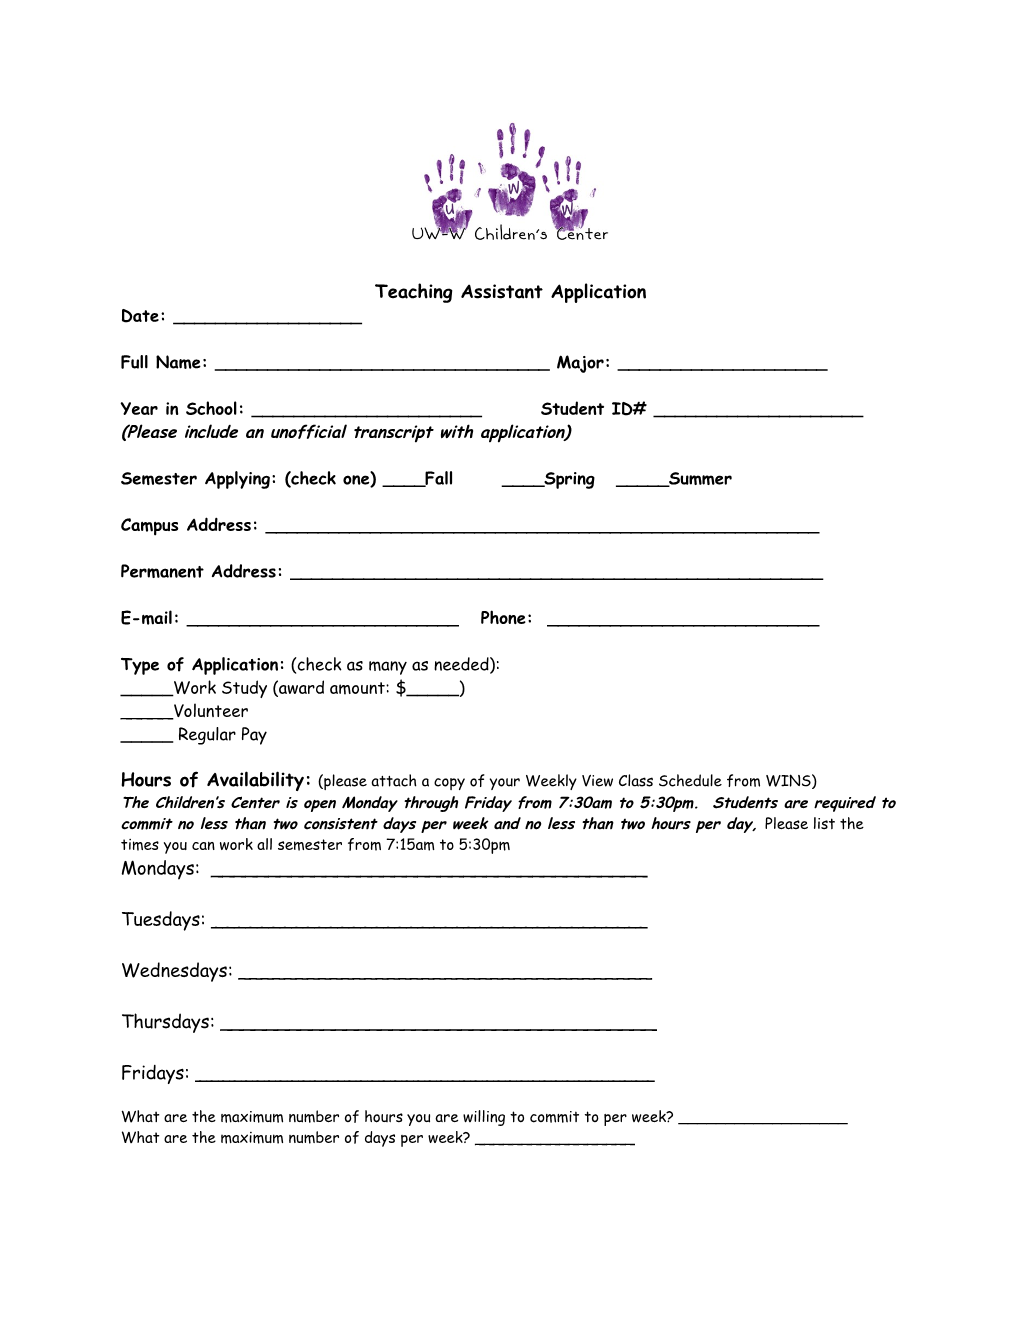 Teaching Assistant Application